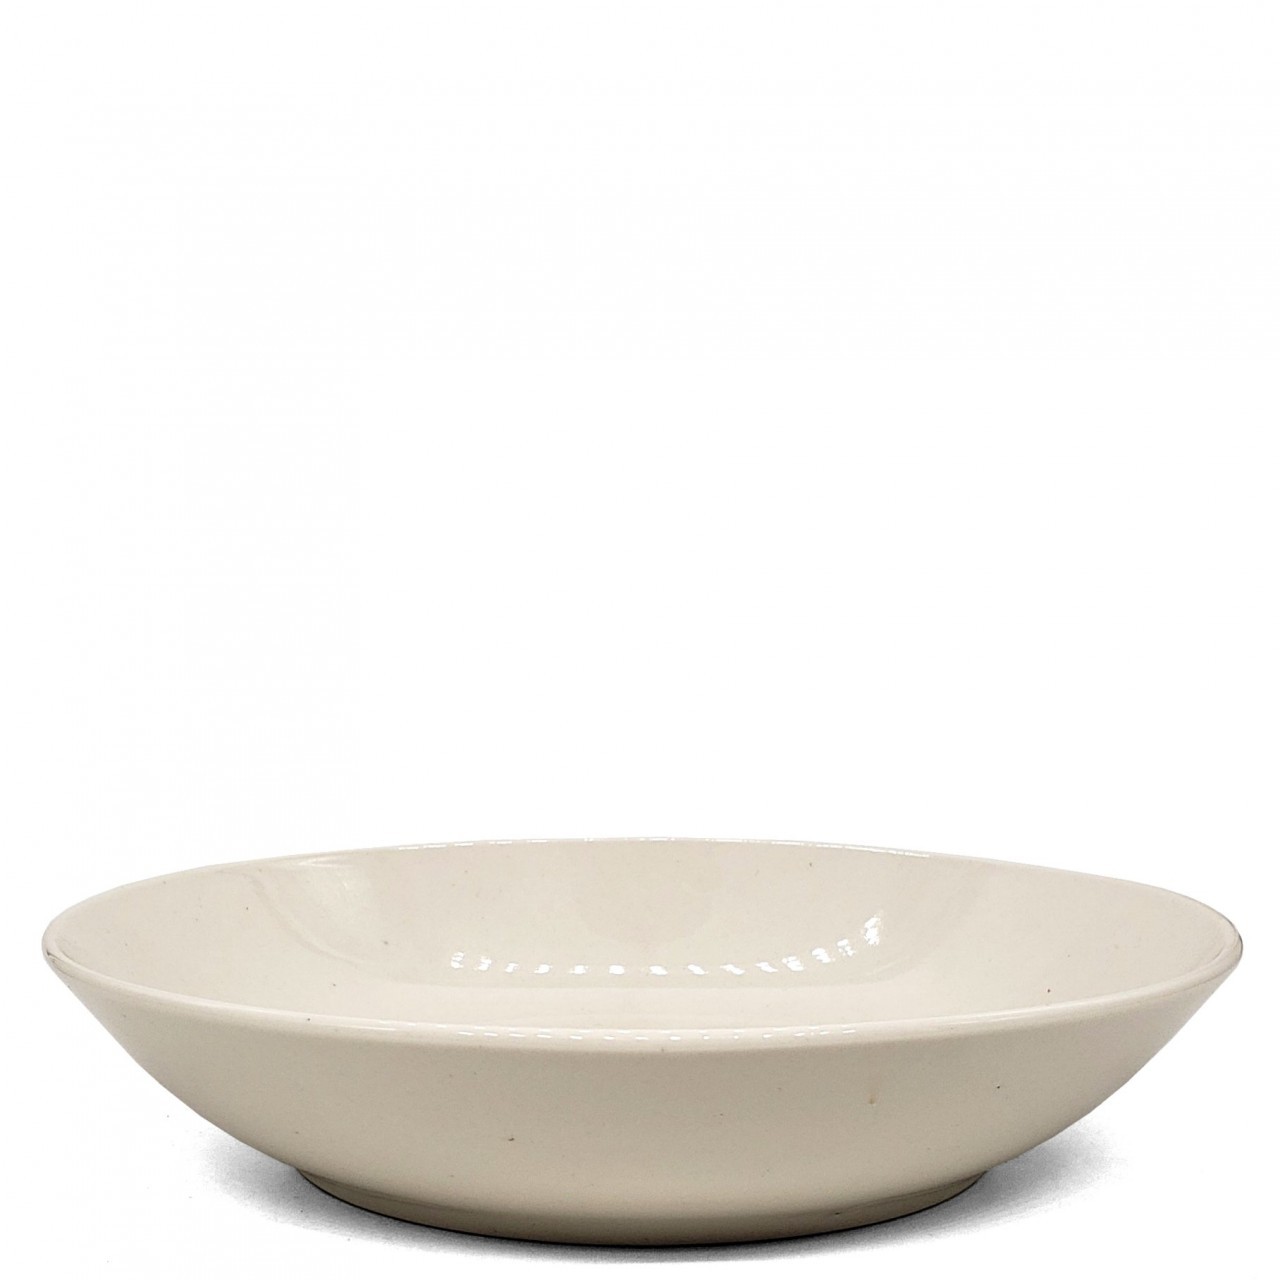 CREATIVE TRADING BOWL WHITE 9in